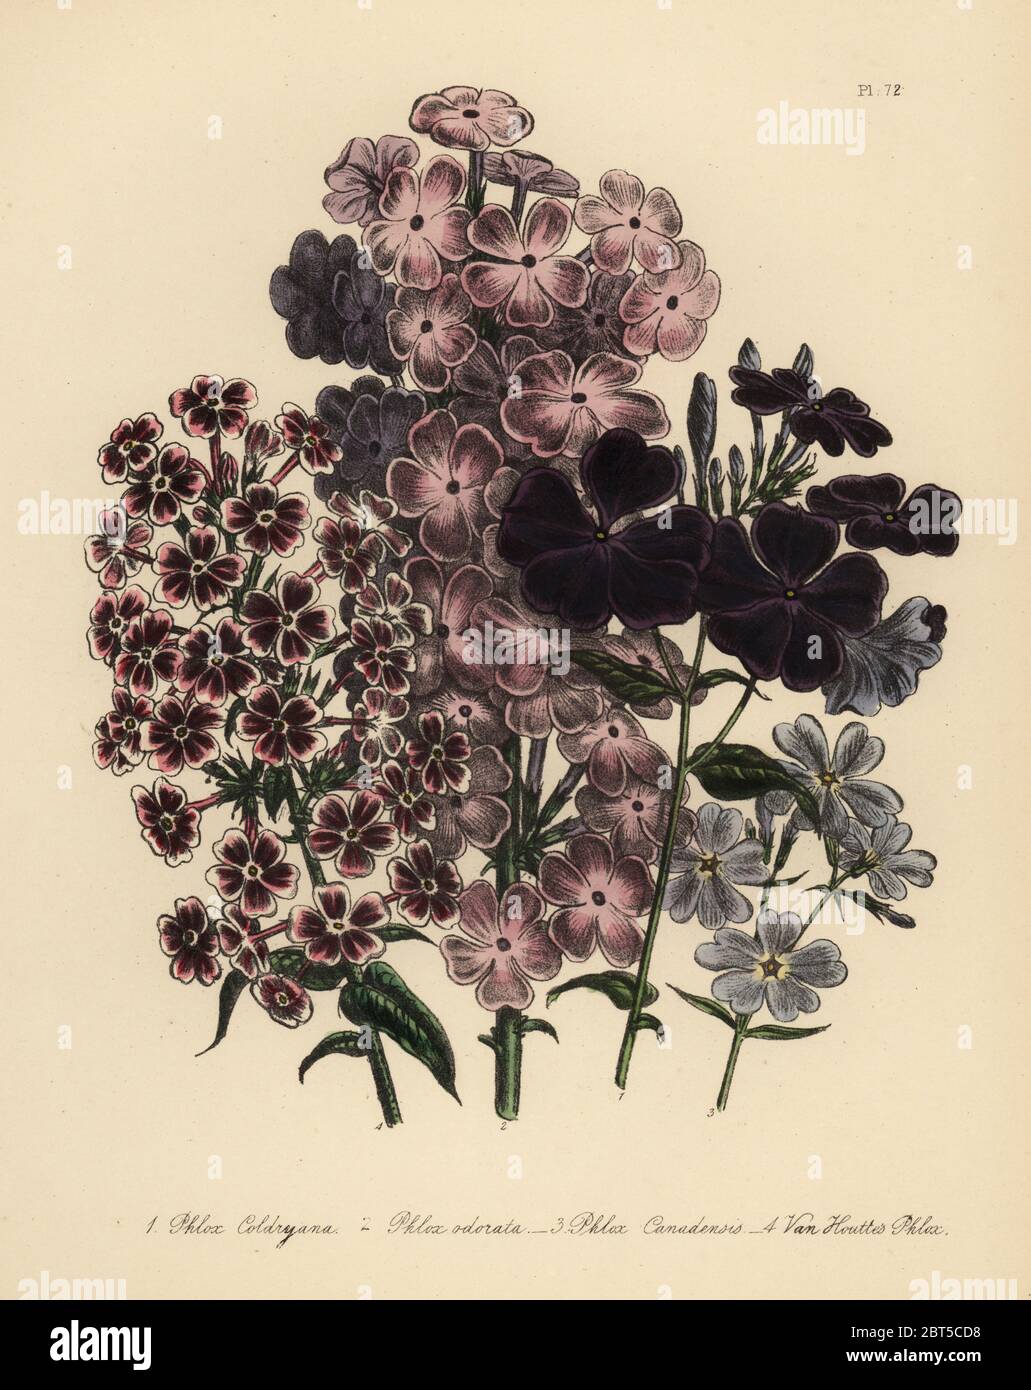 Mr. Coldry's phlox, Phlox coldryana, sweet-scented phlox, Phlox odorata, blue Canadian phlox, Phlox canadensis, and Van Houtte's phlox. Handfinished chromolithograph by Henry Noel Humphreys after an illustration by Jane Loudon from Mrs. Jane Loudon's Ladies Flower Garden of Ornamental Perennials, William S. Orr, London, 1849. Stock Photo